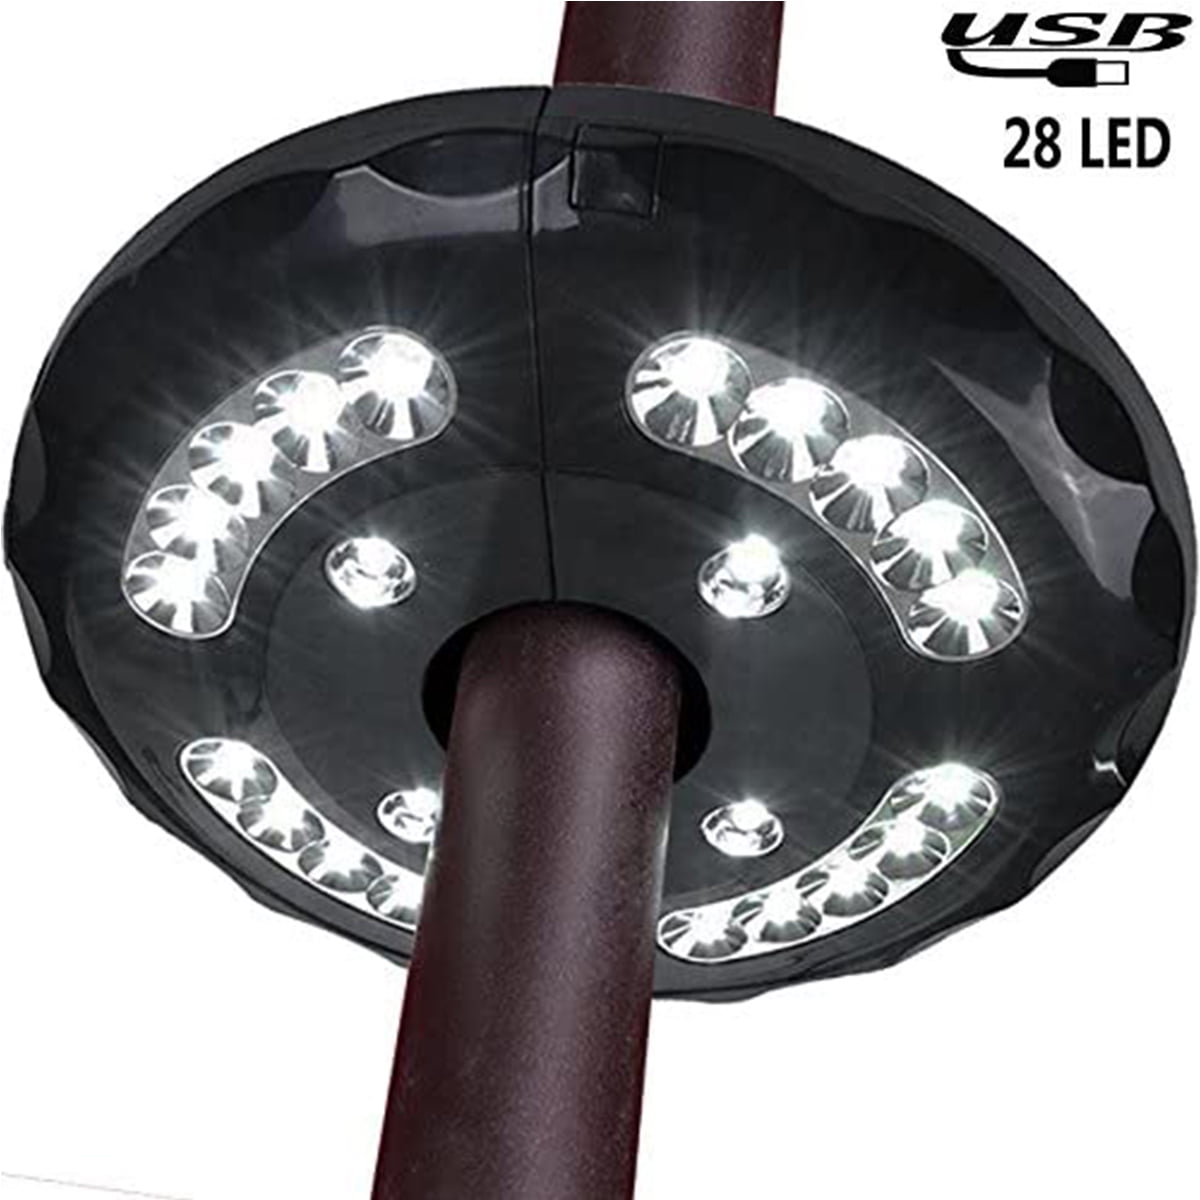 28 LED Umbrella Lights 200LM Patio Table Emergency Light For Outdoor Camp Tents 